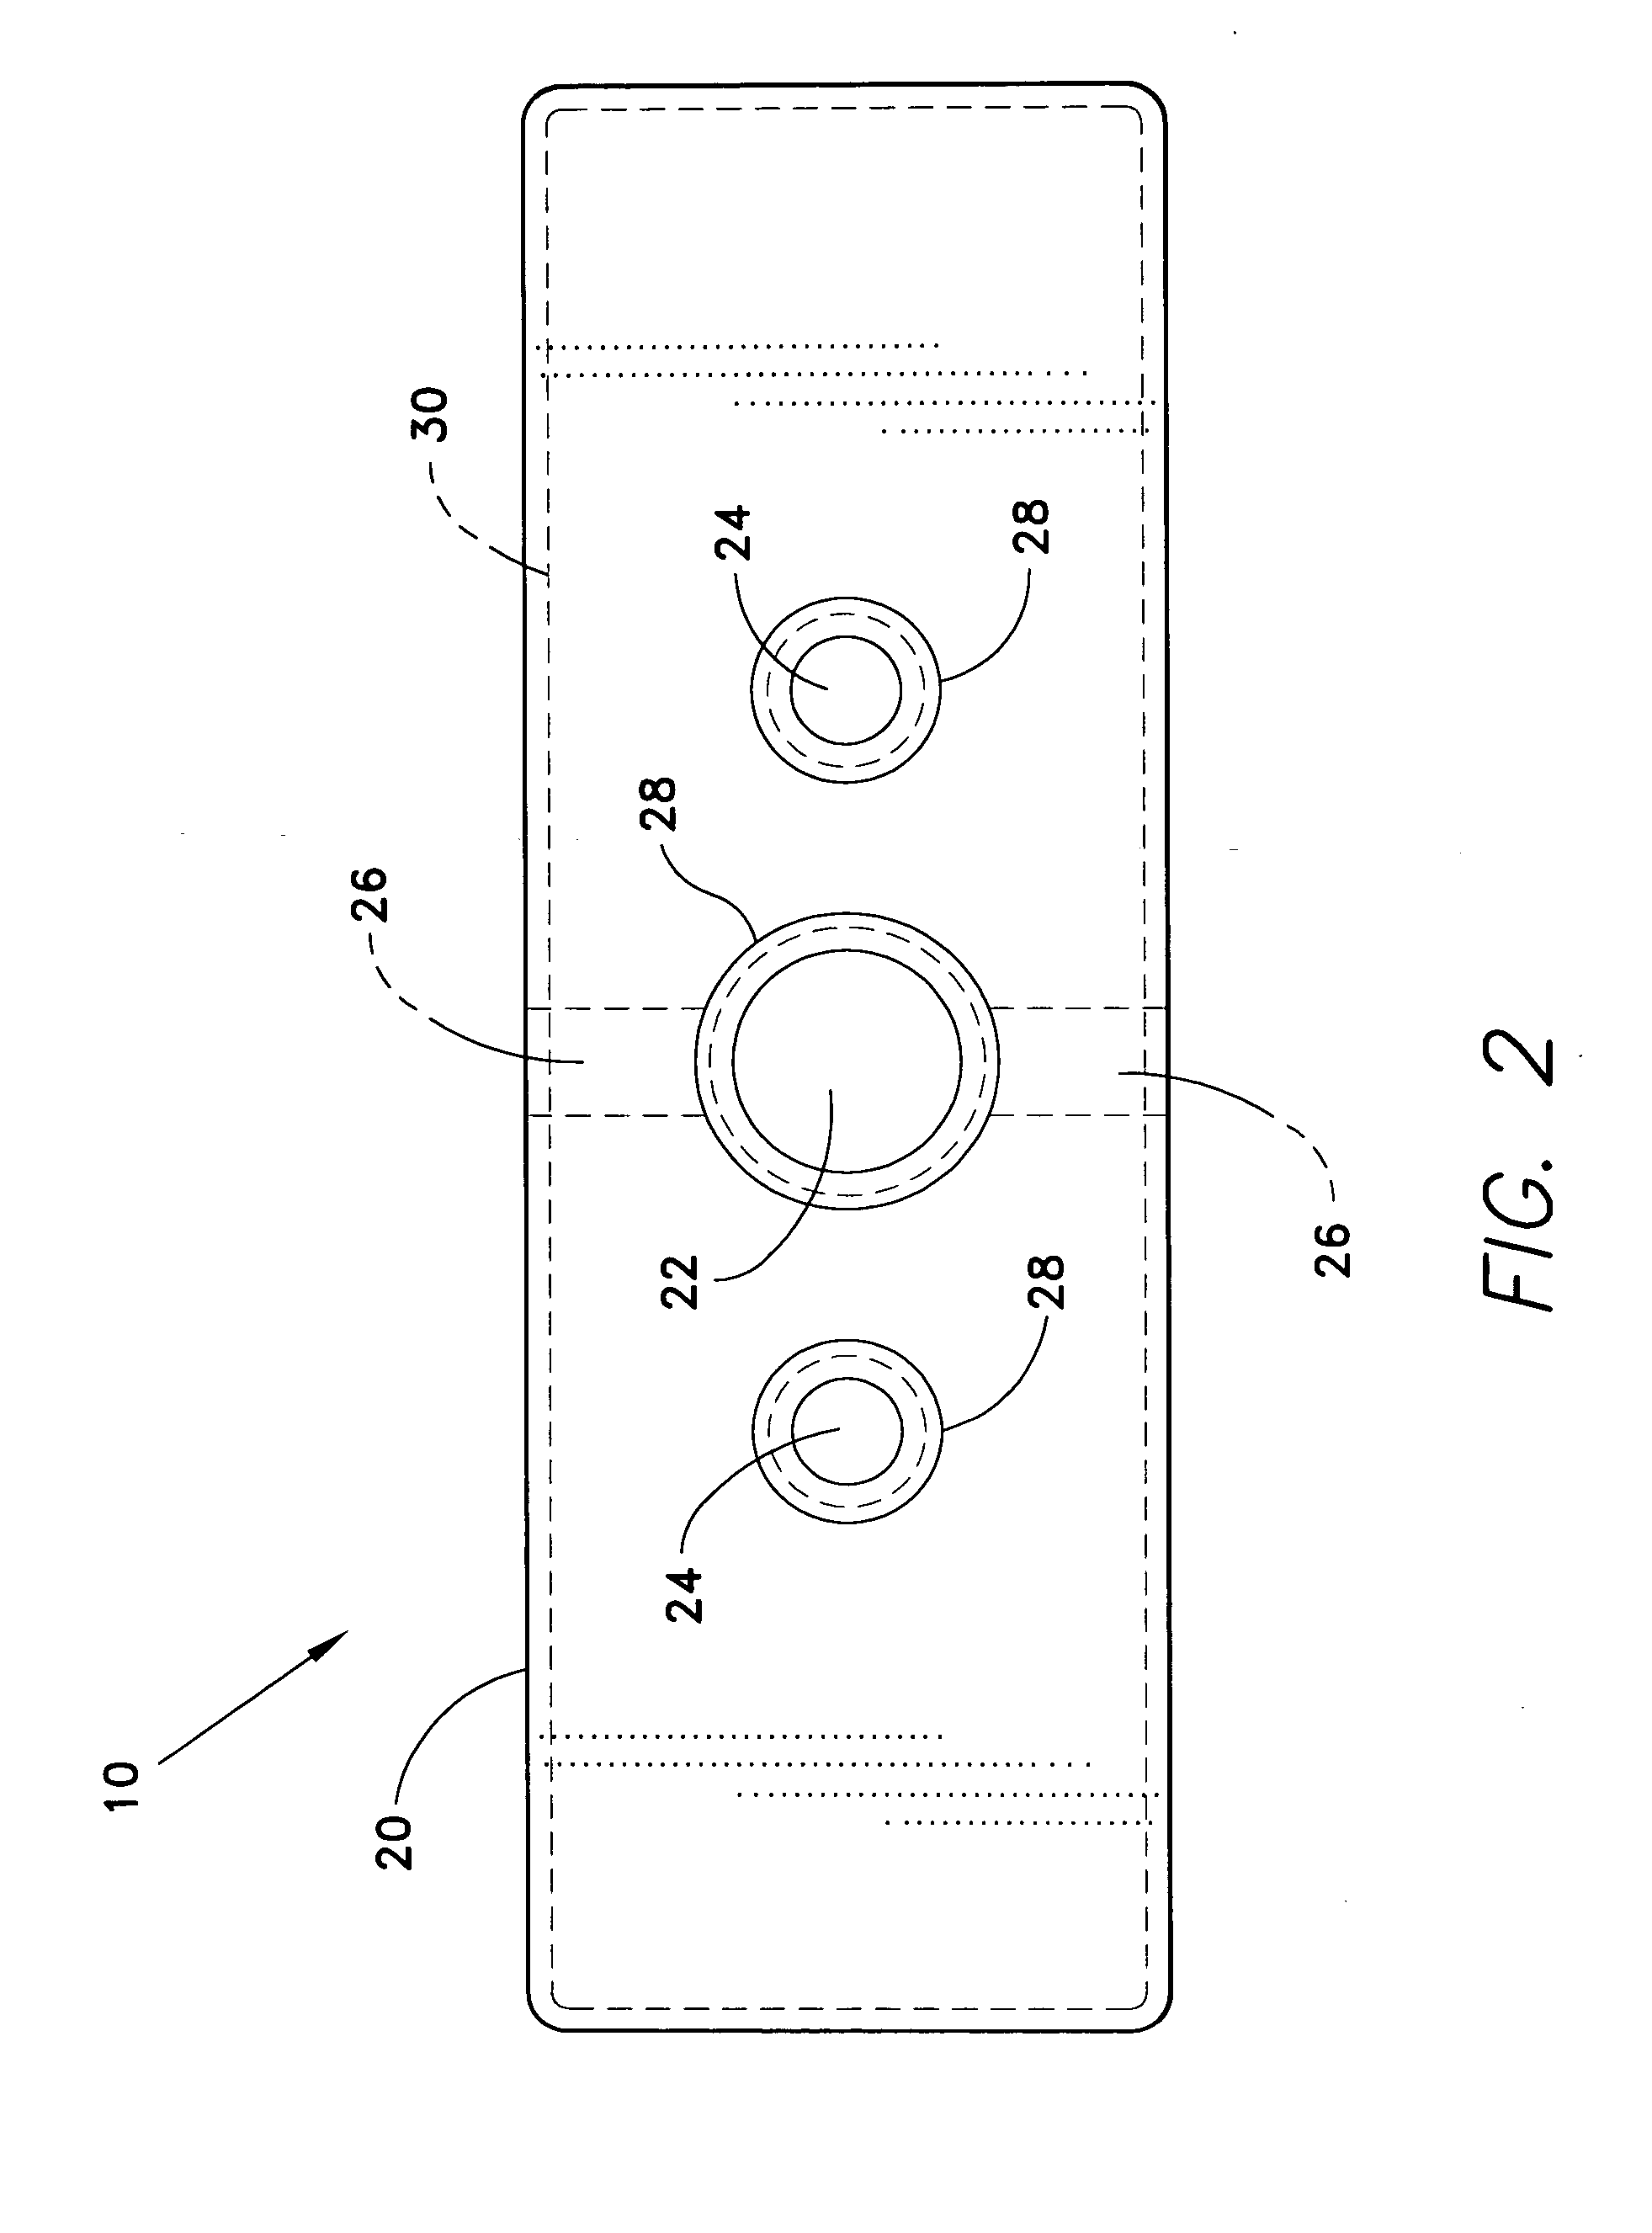 Selector weight plate